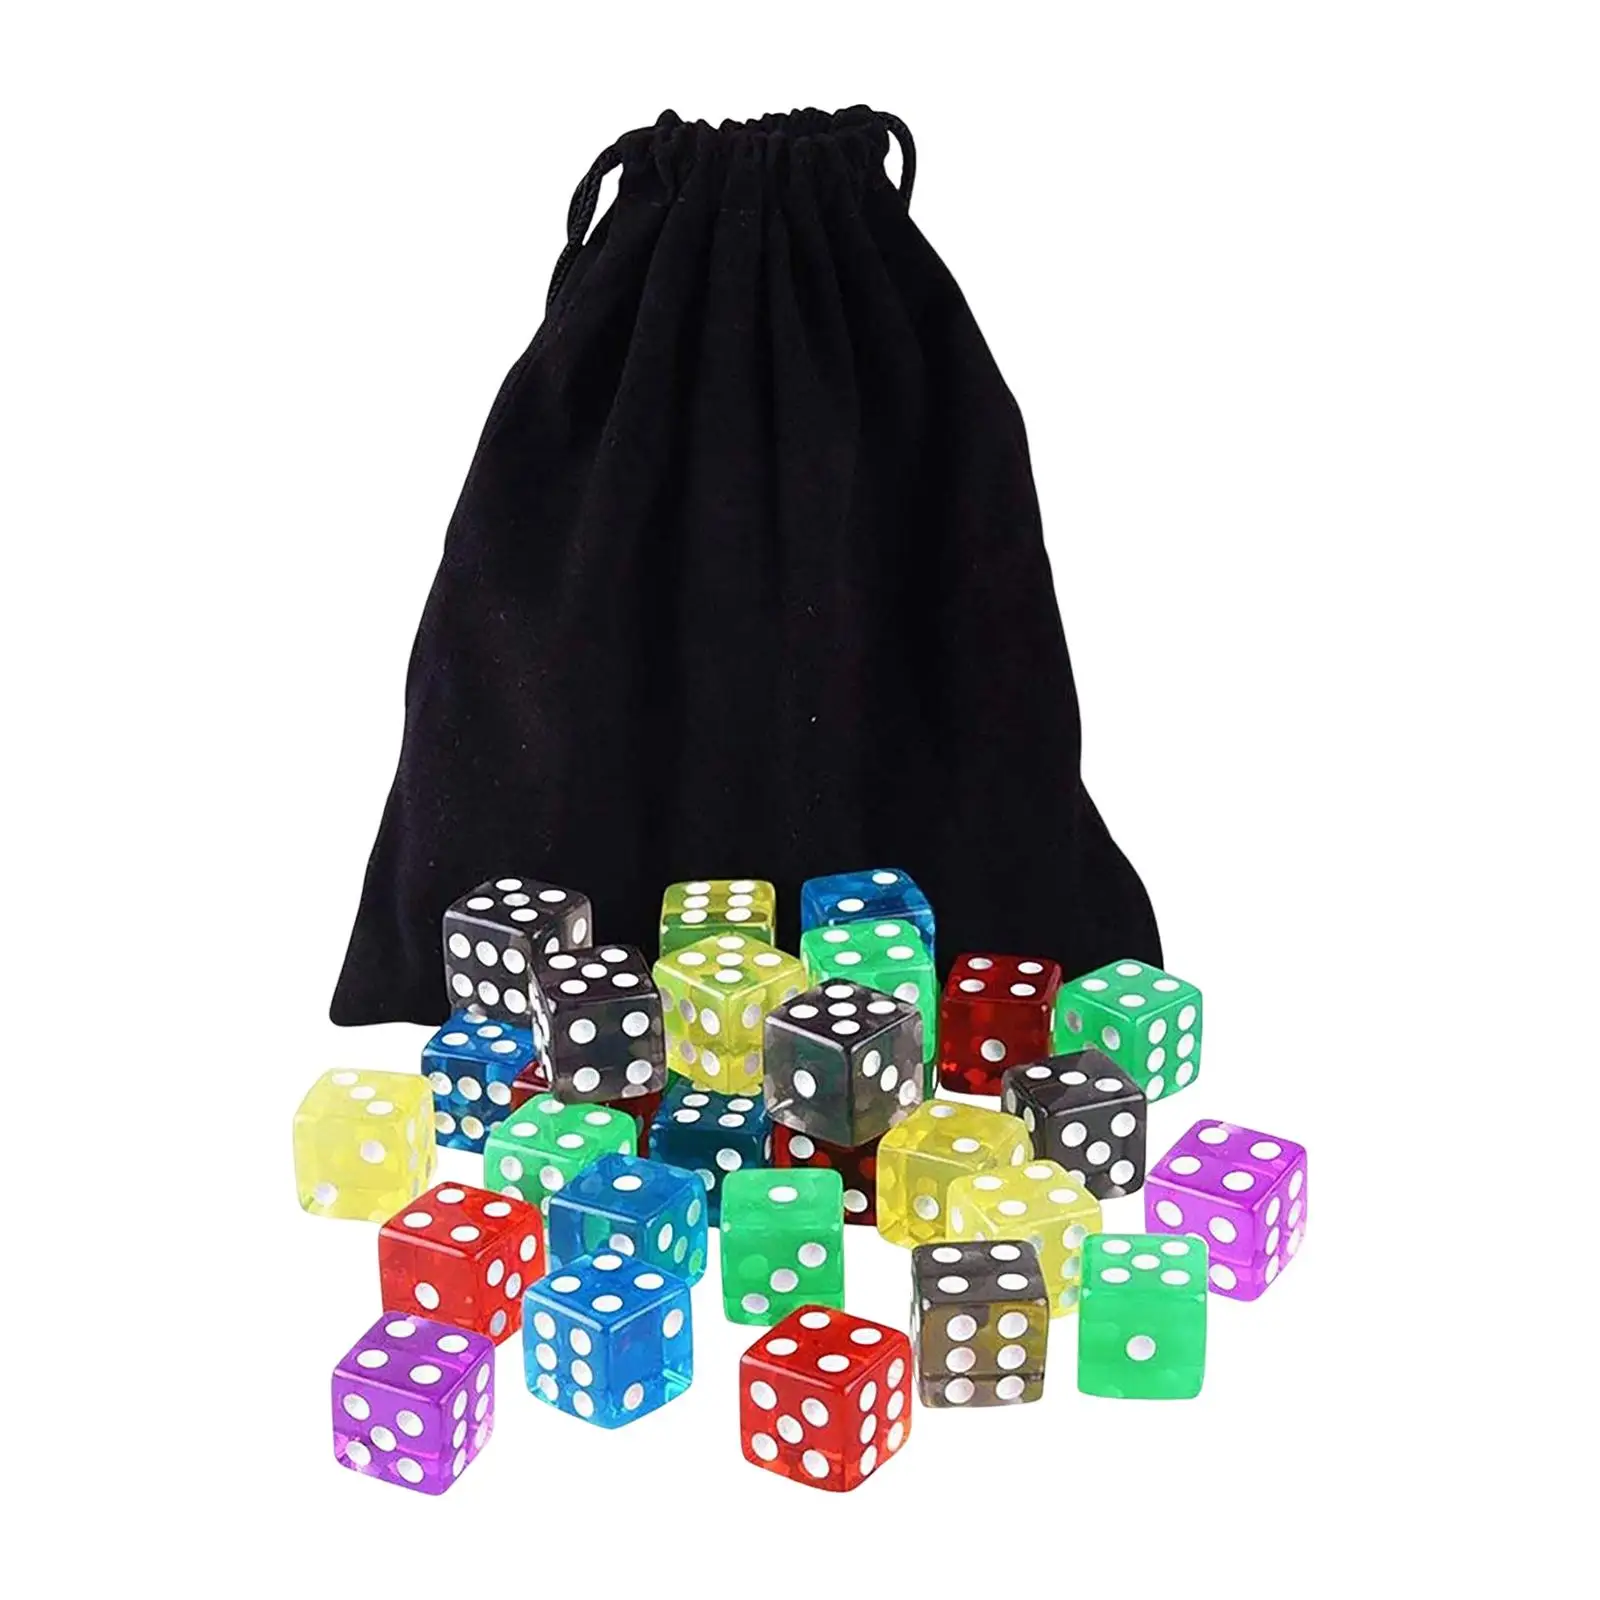 60 Pieces D6 6 Sided Dice Set with Velvet Pouch,Table Borad Games,Role Playing